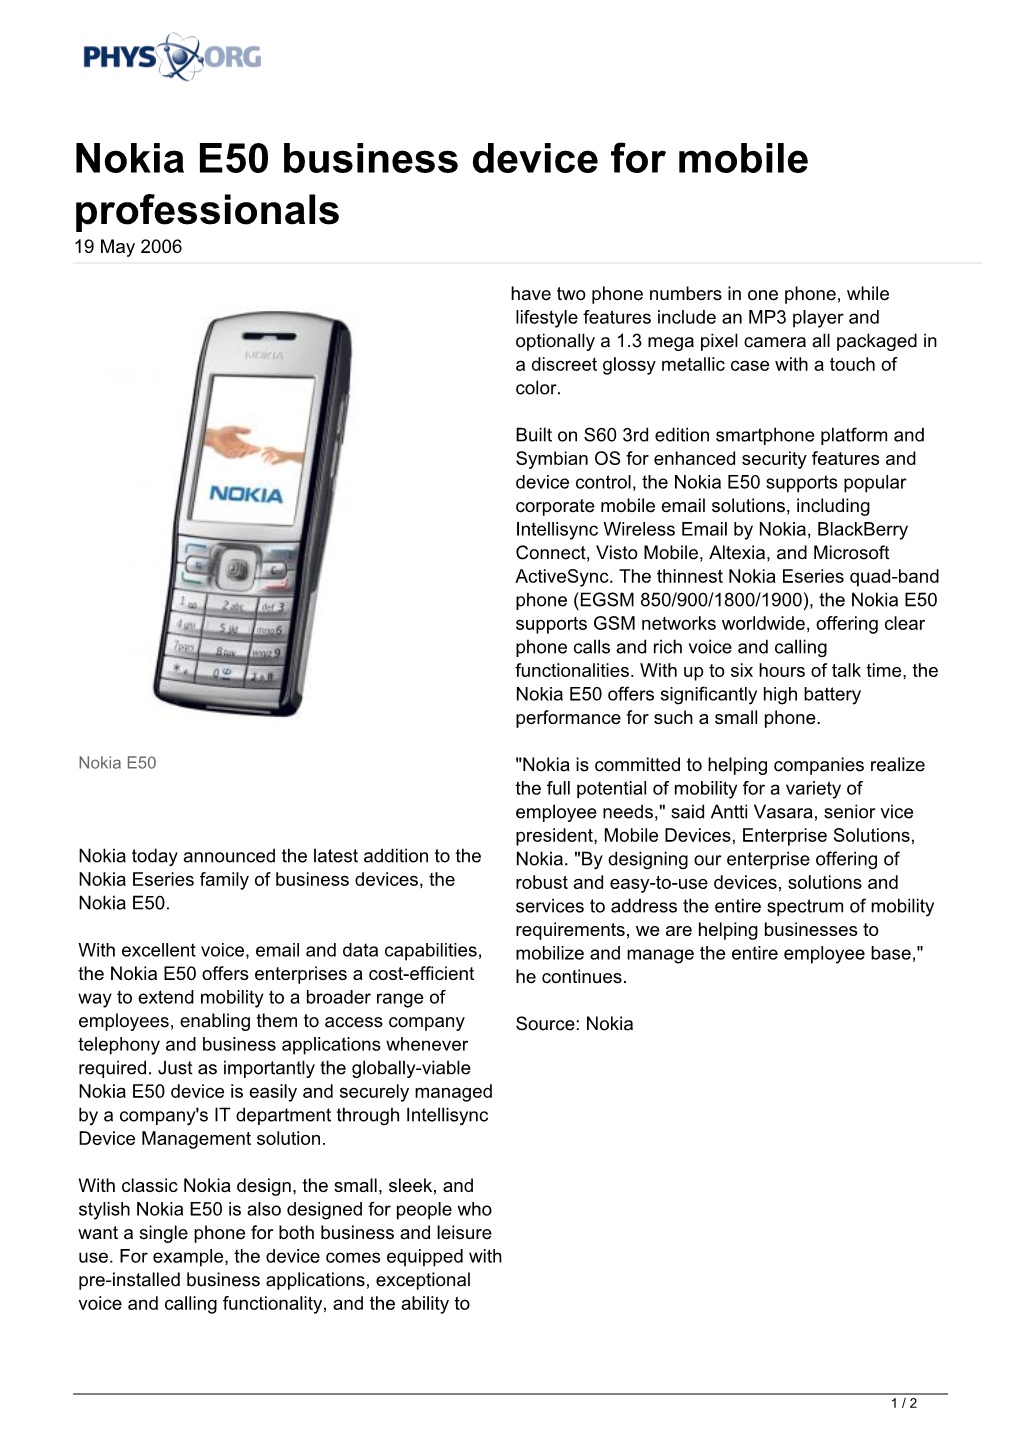 Nokia E50 Business Device for Mobile Professionals 19 May 2006